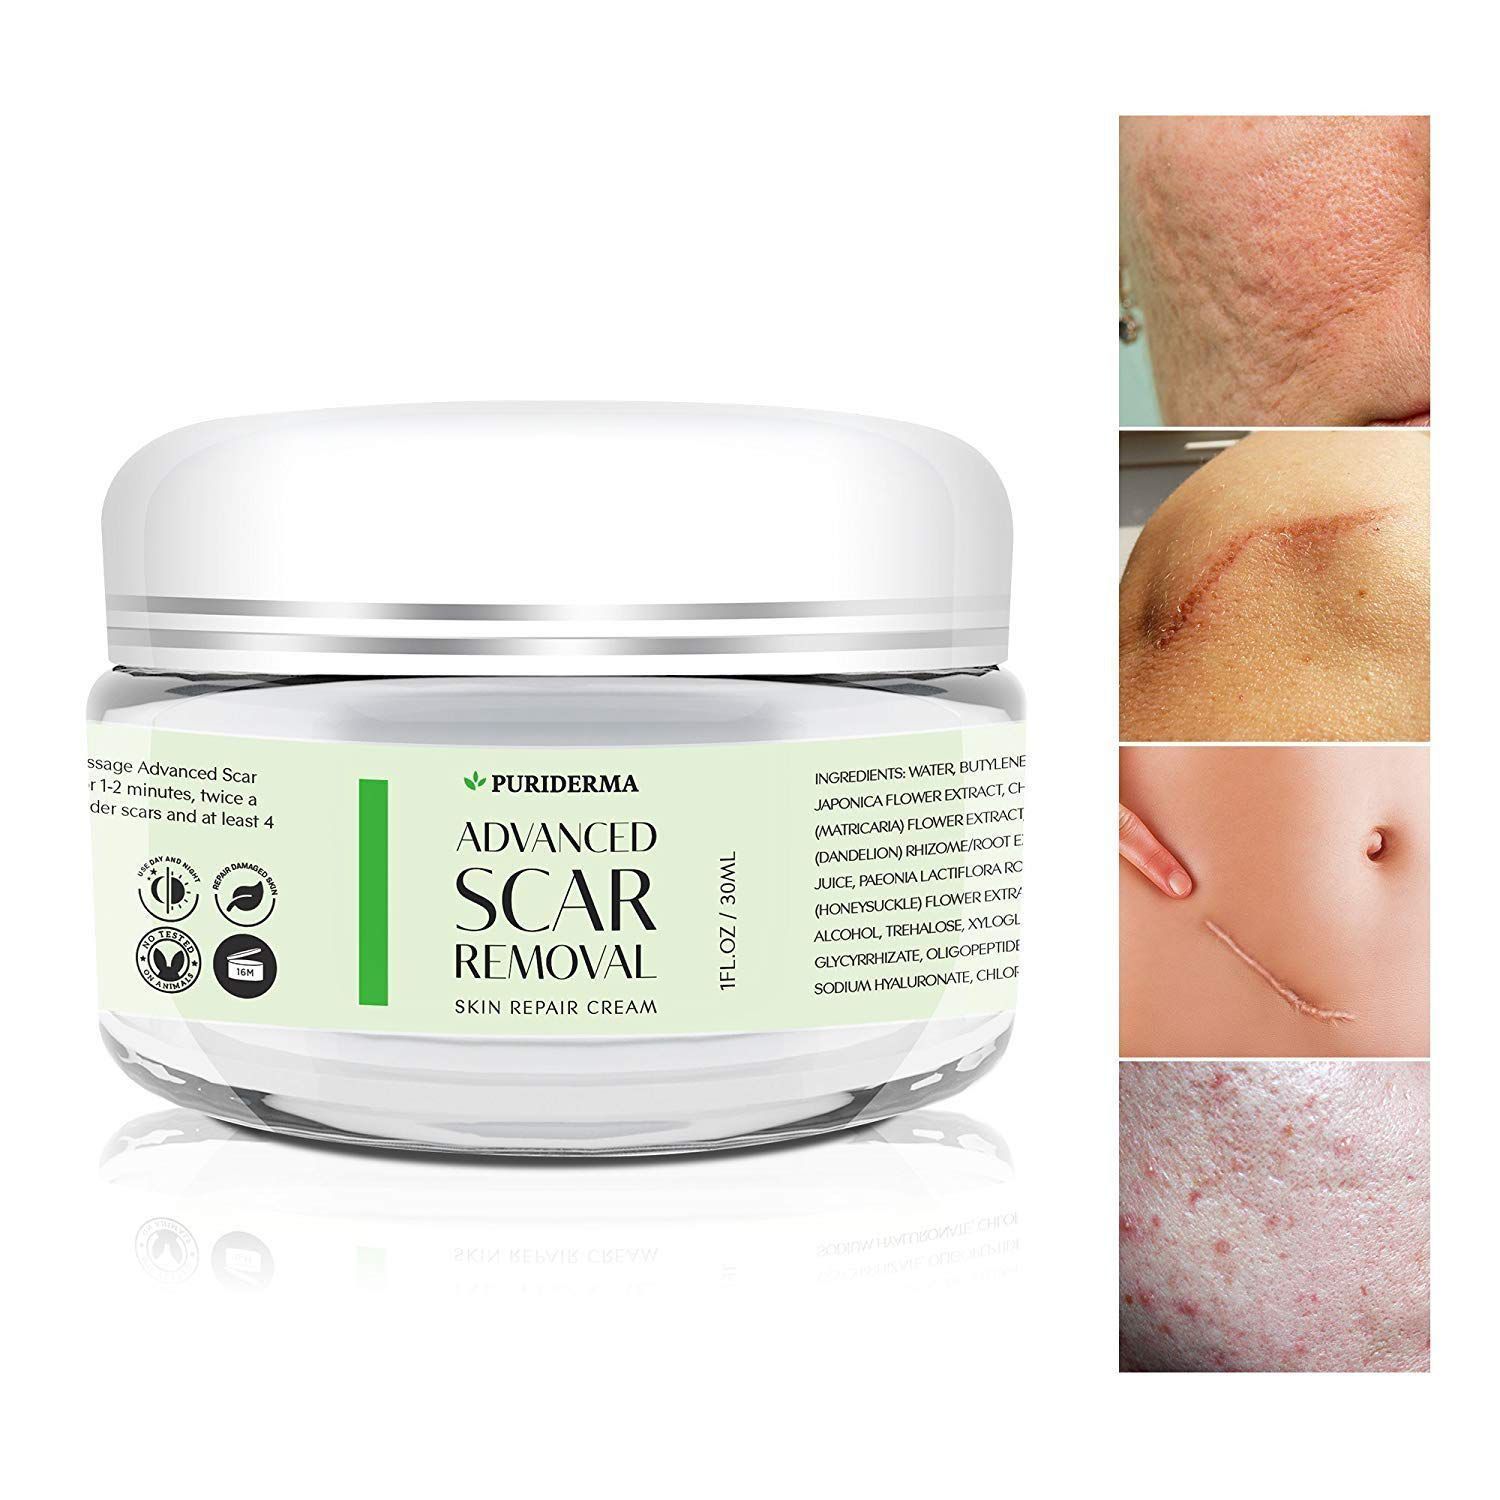 How should you take care of your scars after skin surgery? post thumbnail image